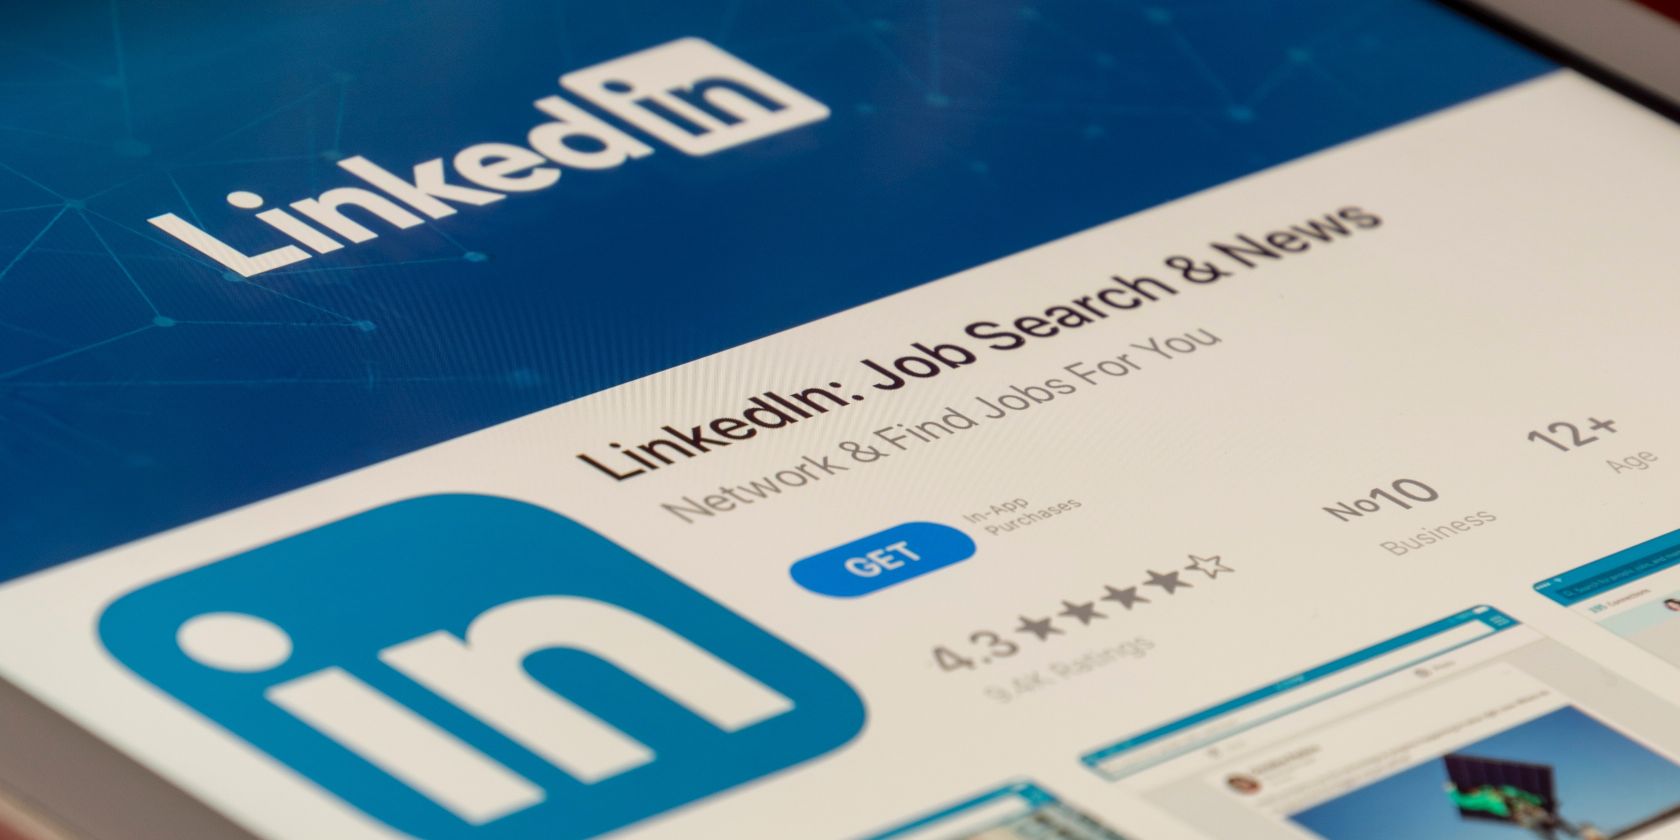 How to Promote Yourself on LinkedIn as a Writer: 7 Tips and Tools